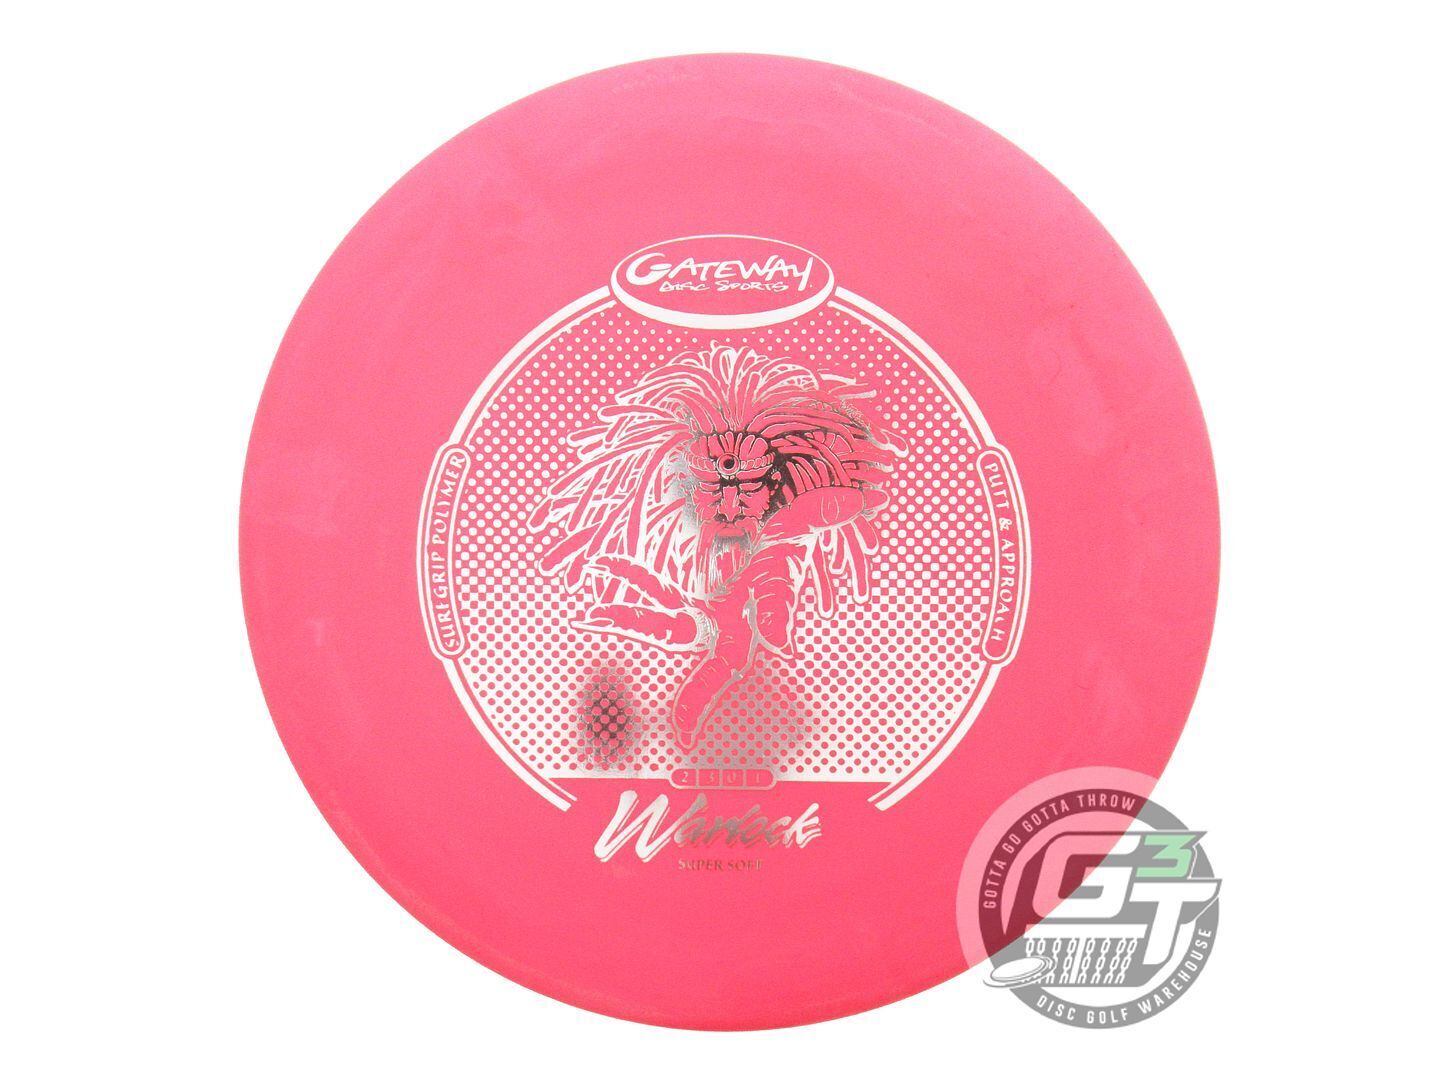 Gateway Sure Grip Super Soft Warlock Putter Golf Disc (Individually Listed)